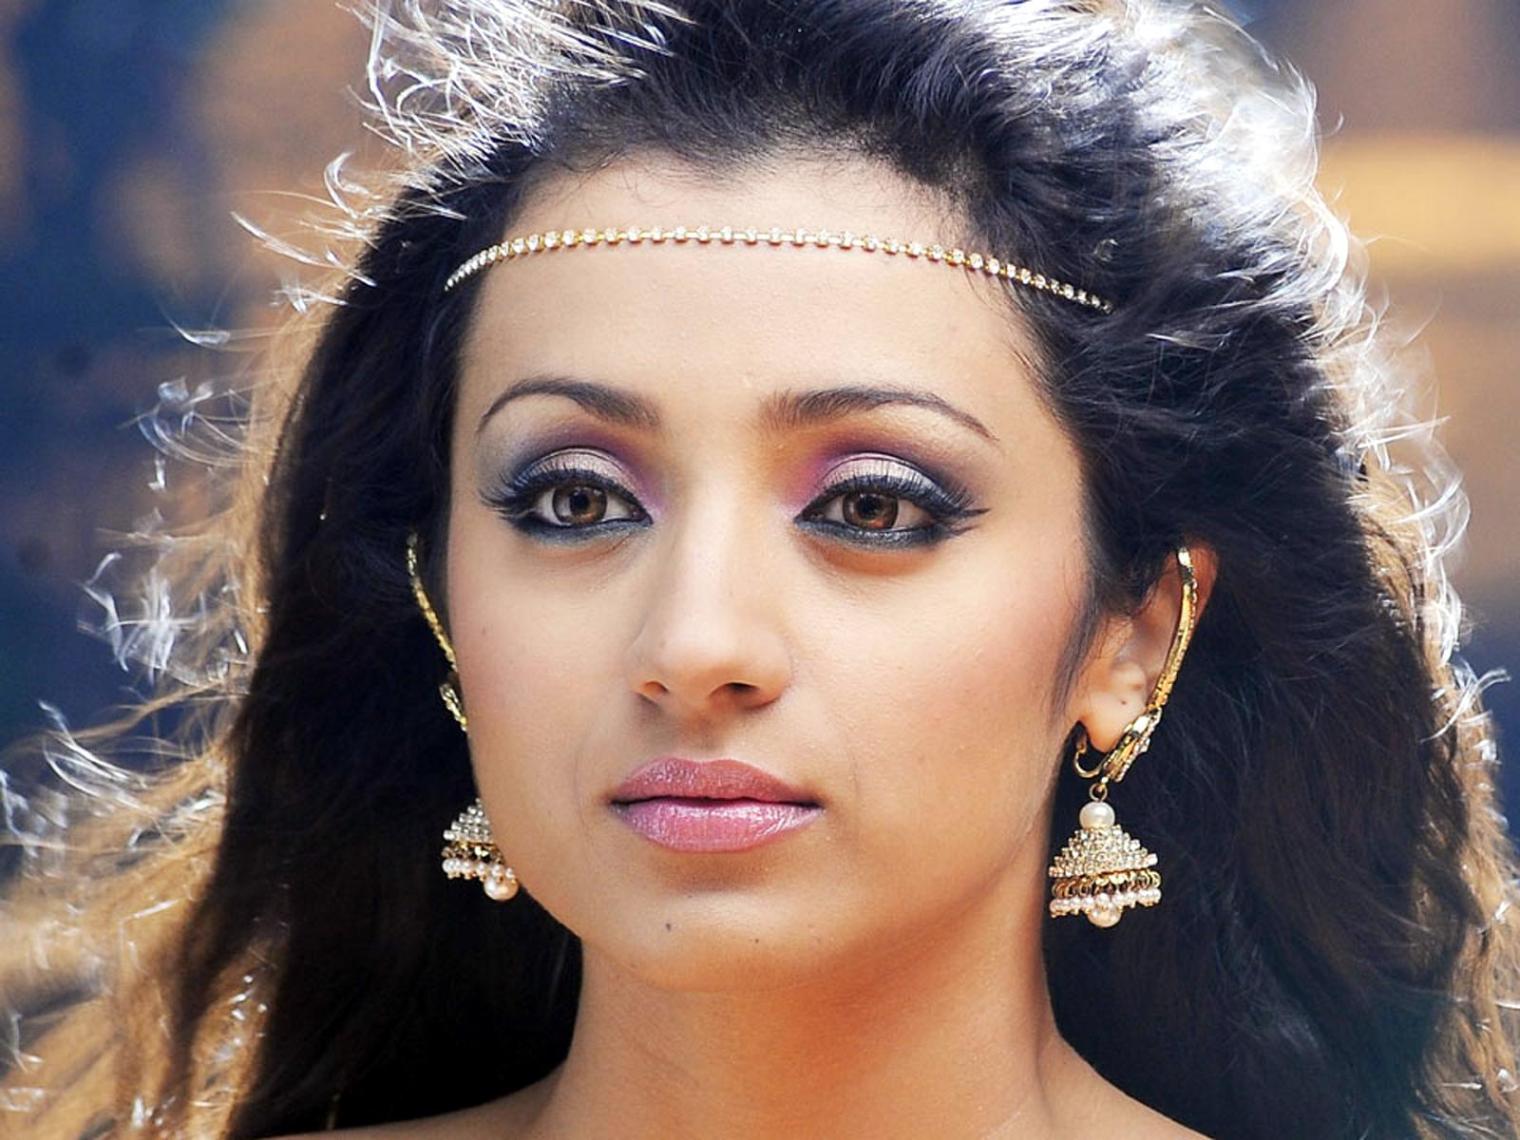 Trisha nude topless gallery - Real Naked Girls